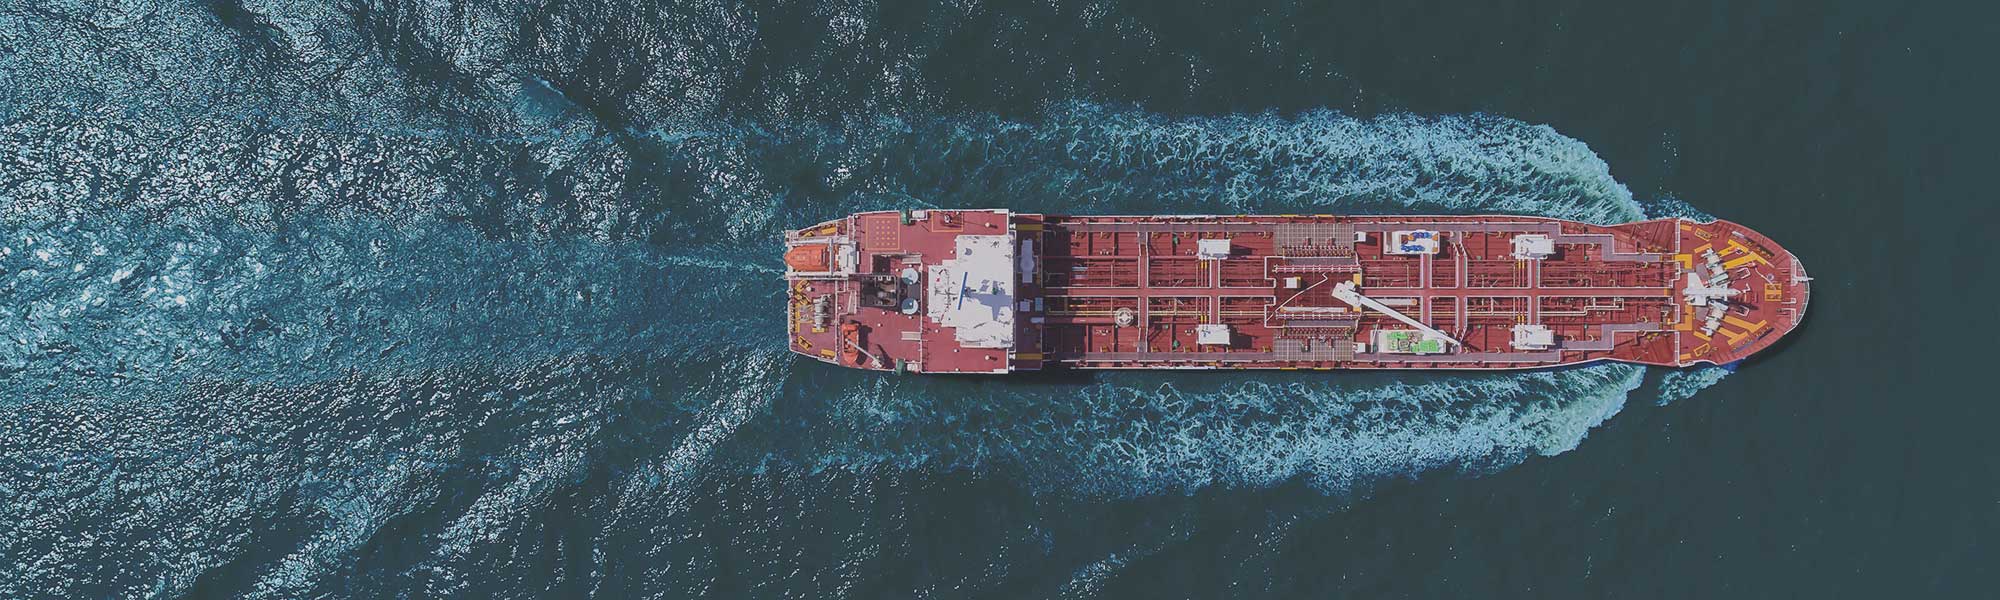 Aerial view of a ship on the ocean.